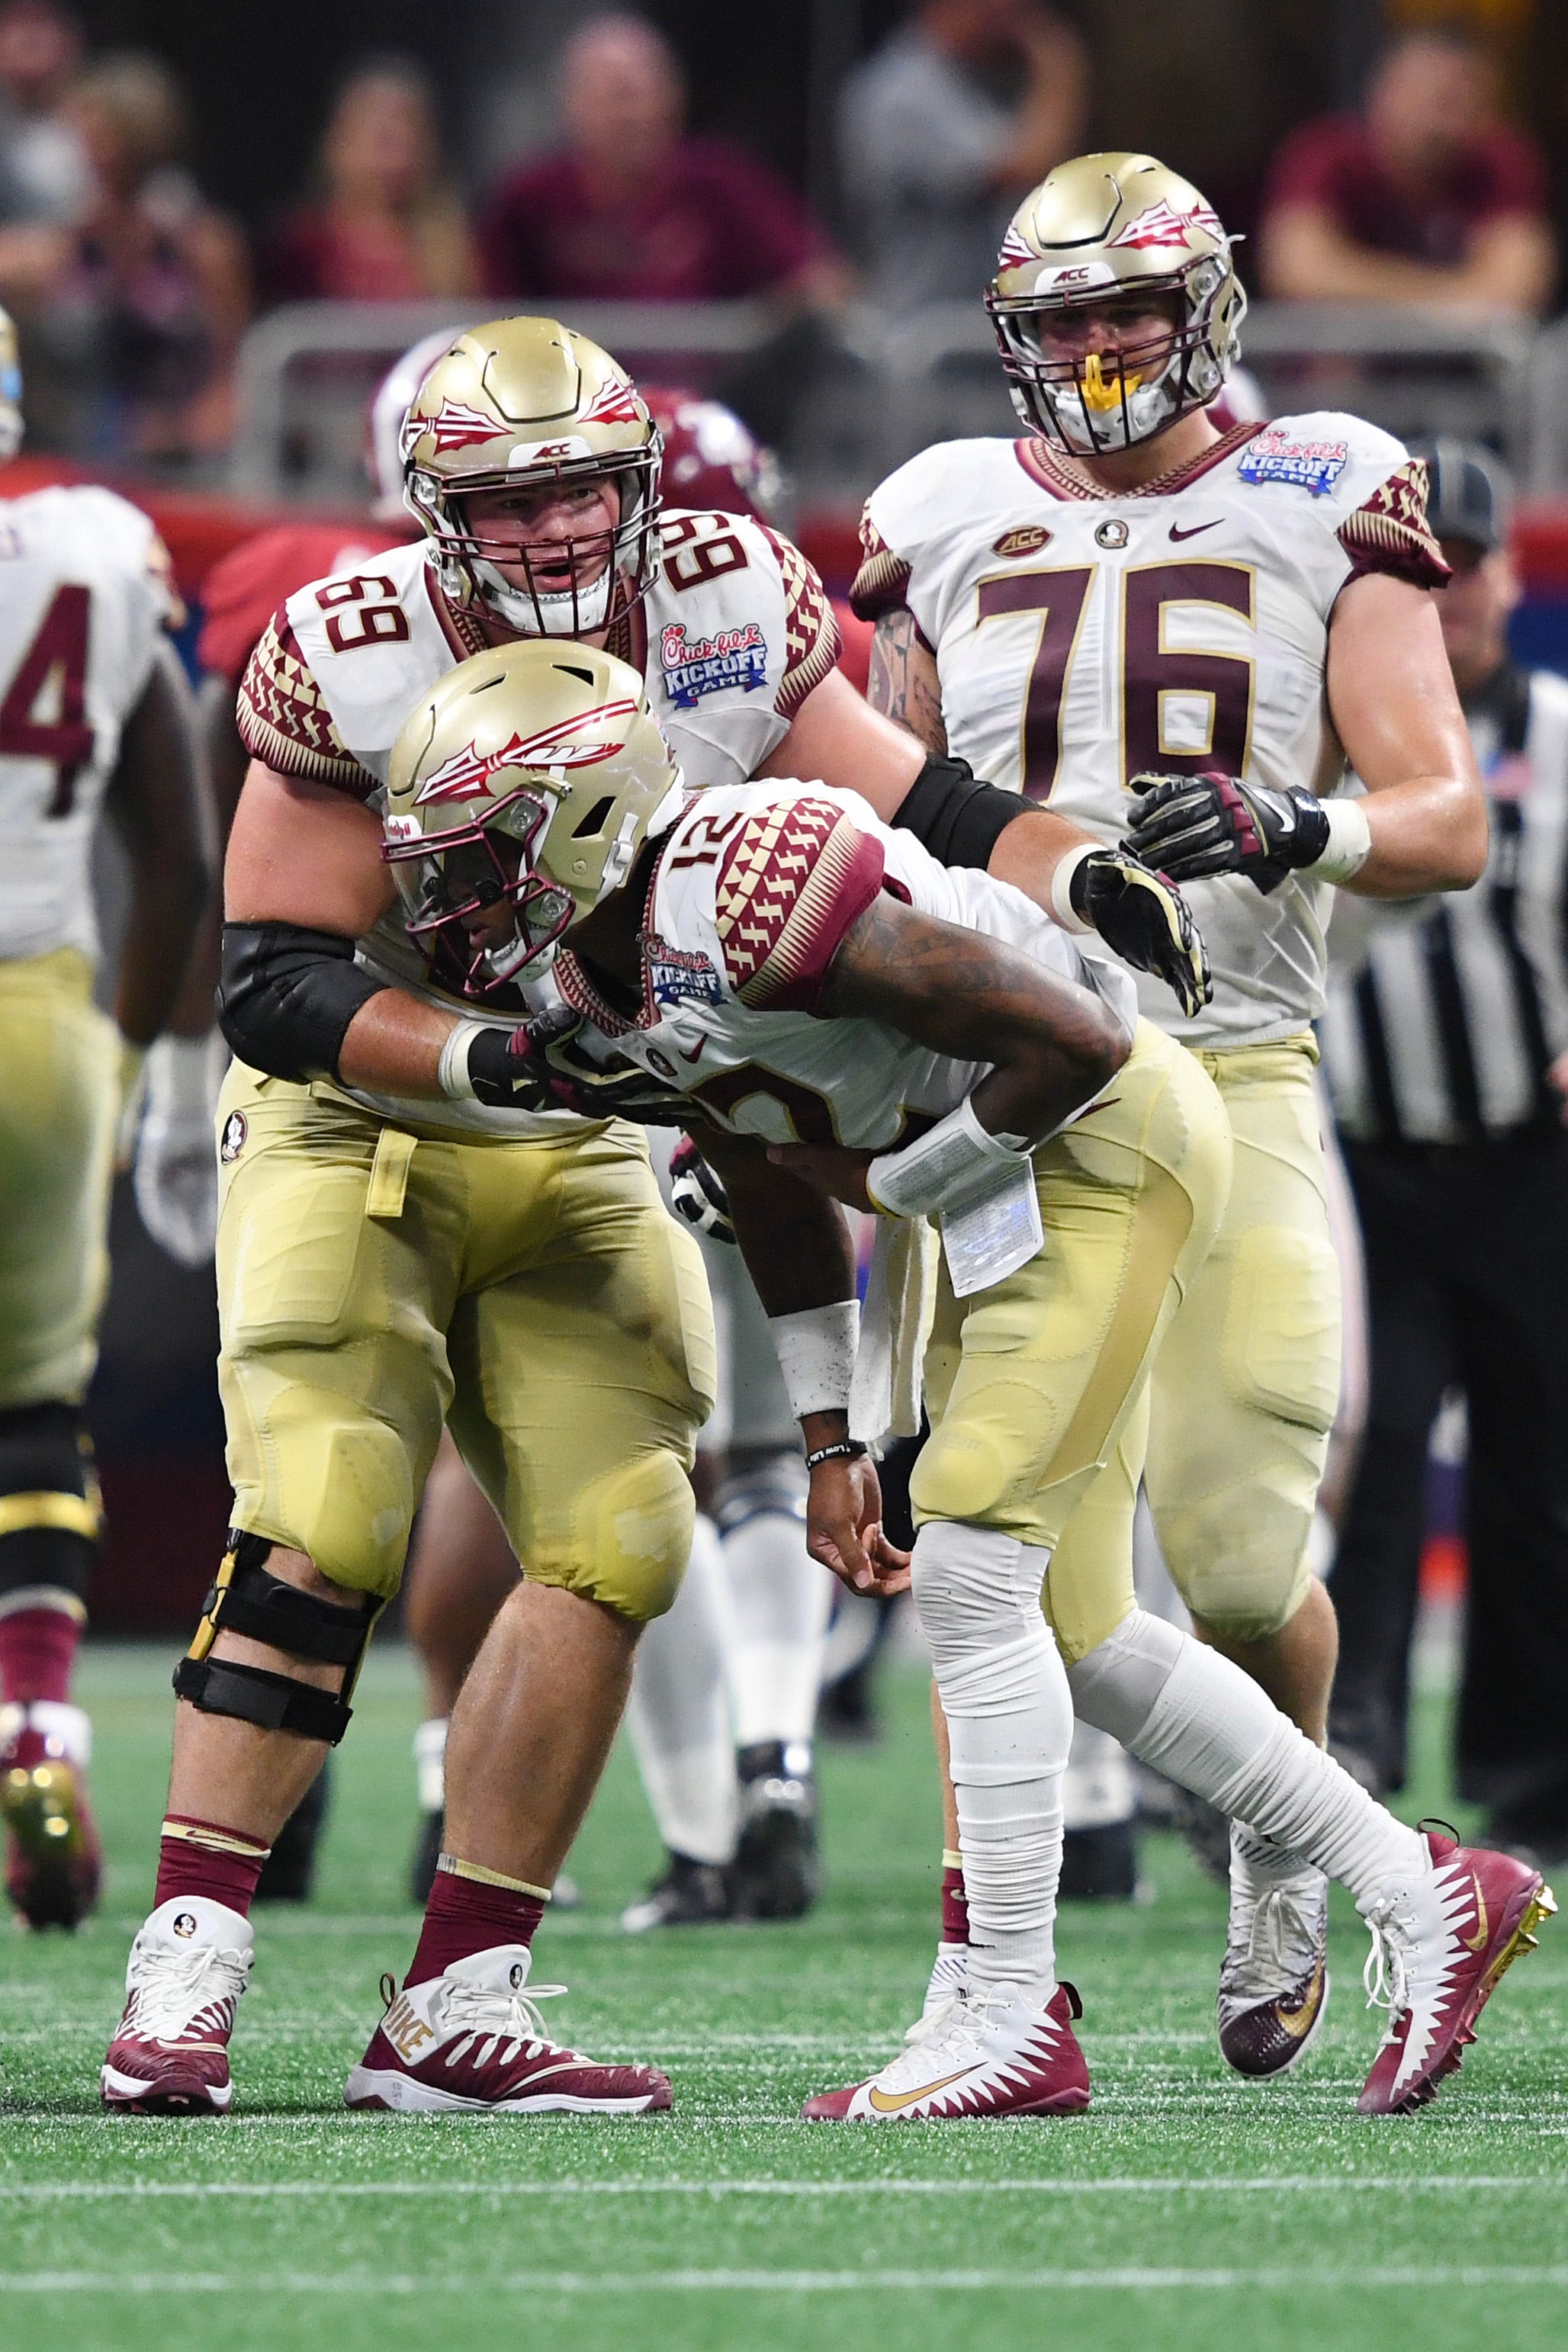 Sep 2, 2017; Atlanta, GA, USA; Florida State Seminoles quarterback Deondre Francois (12) is helped up by offensive lineman Landon Dickerson (69) and Florida State Seminoles offensive lineman Rick Leonard (76) after taking a hard hit against the Alabama Crimson Tide in the first quarter at Mercedes-Benz Stadium. Mandatory Credit: John David Mercer-USA TODAY Sports